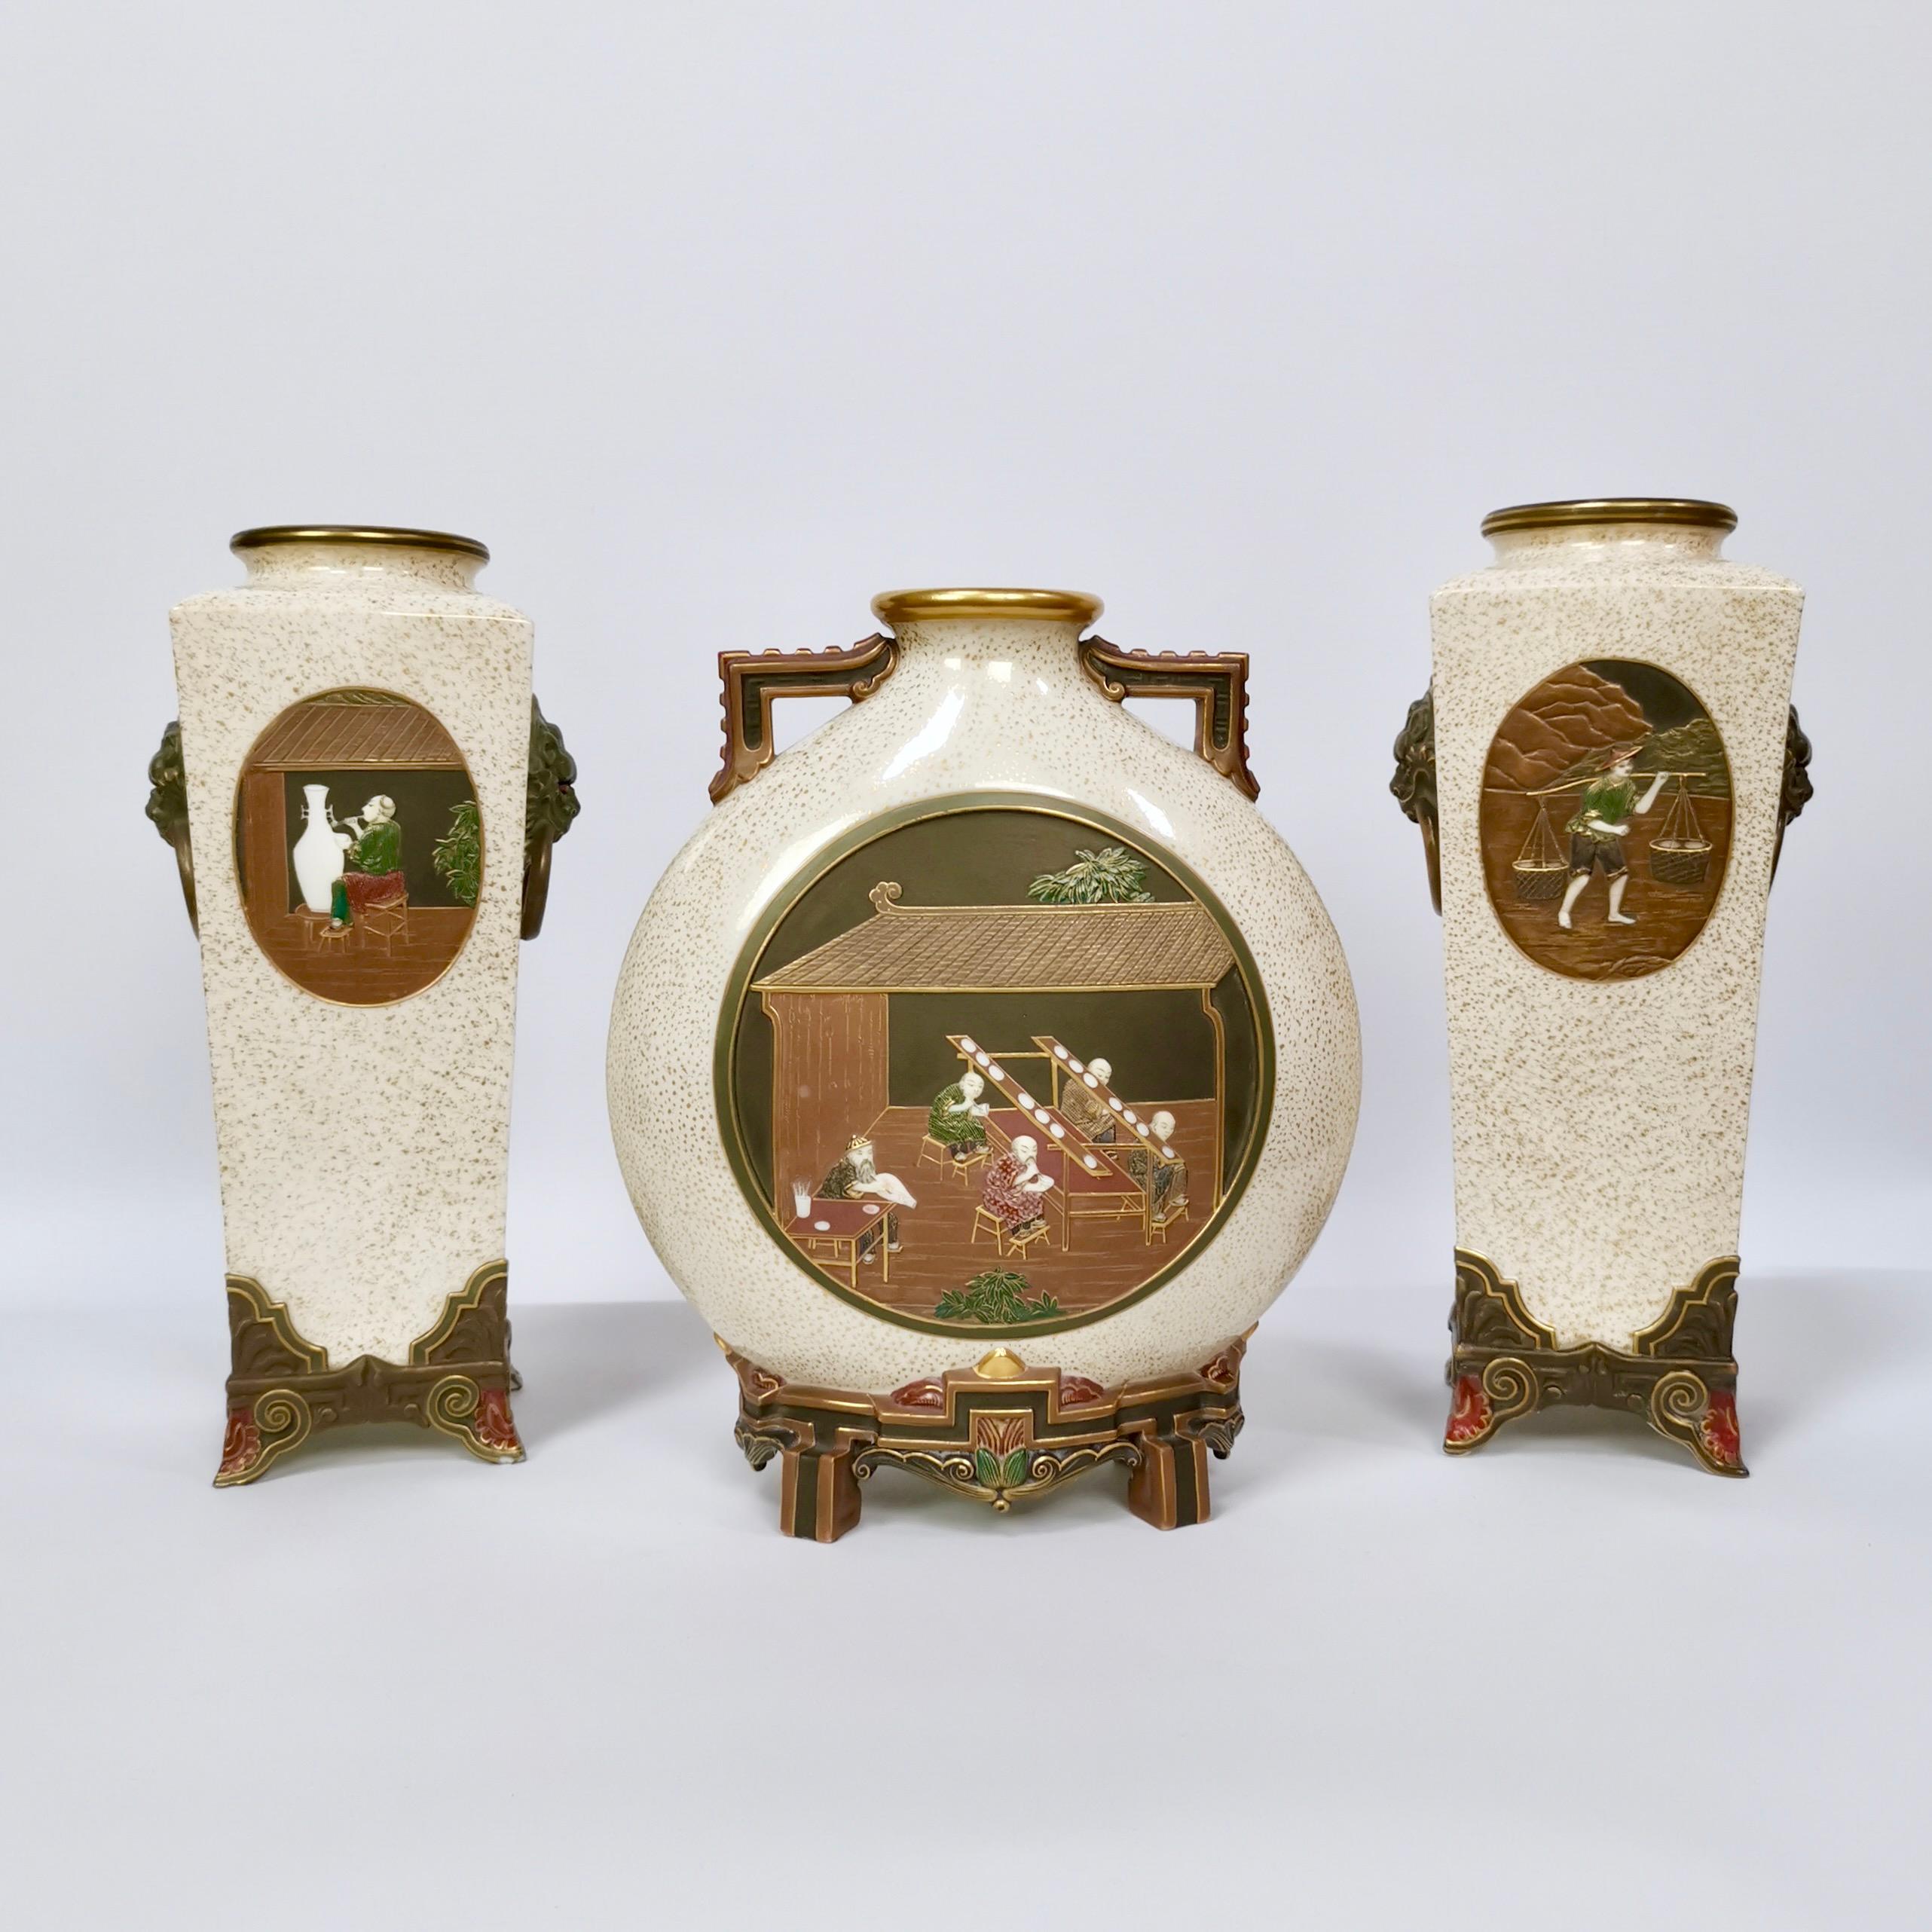 This is a superb and extremely rare garniture of three vases made by Royal Worcester in the years 1872 and 1873. The garniture consists of two square tall vases and one moon flask in the Aesthetic Movement style inspired by the Japanese Satsuma